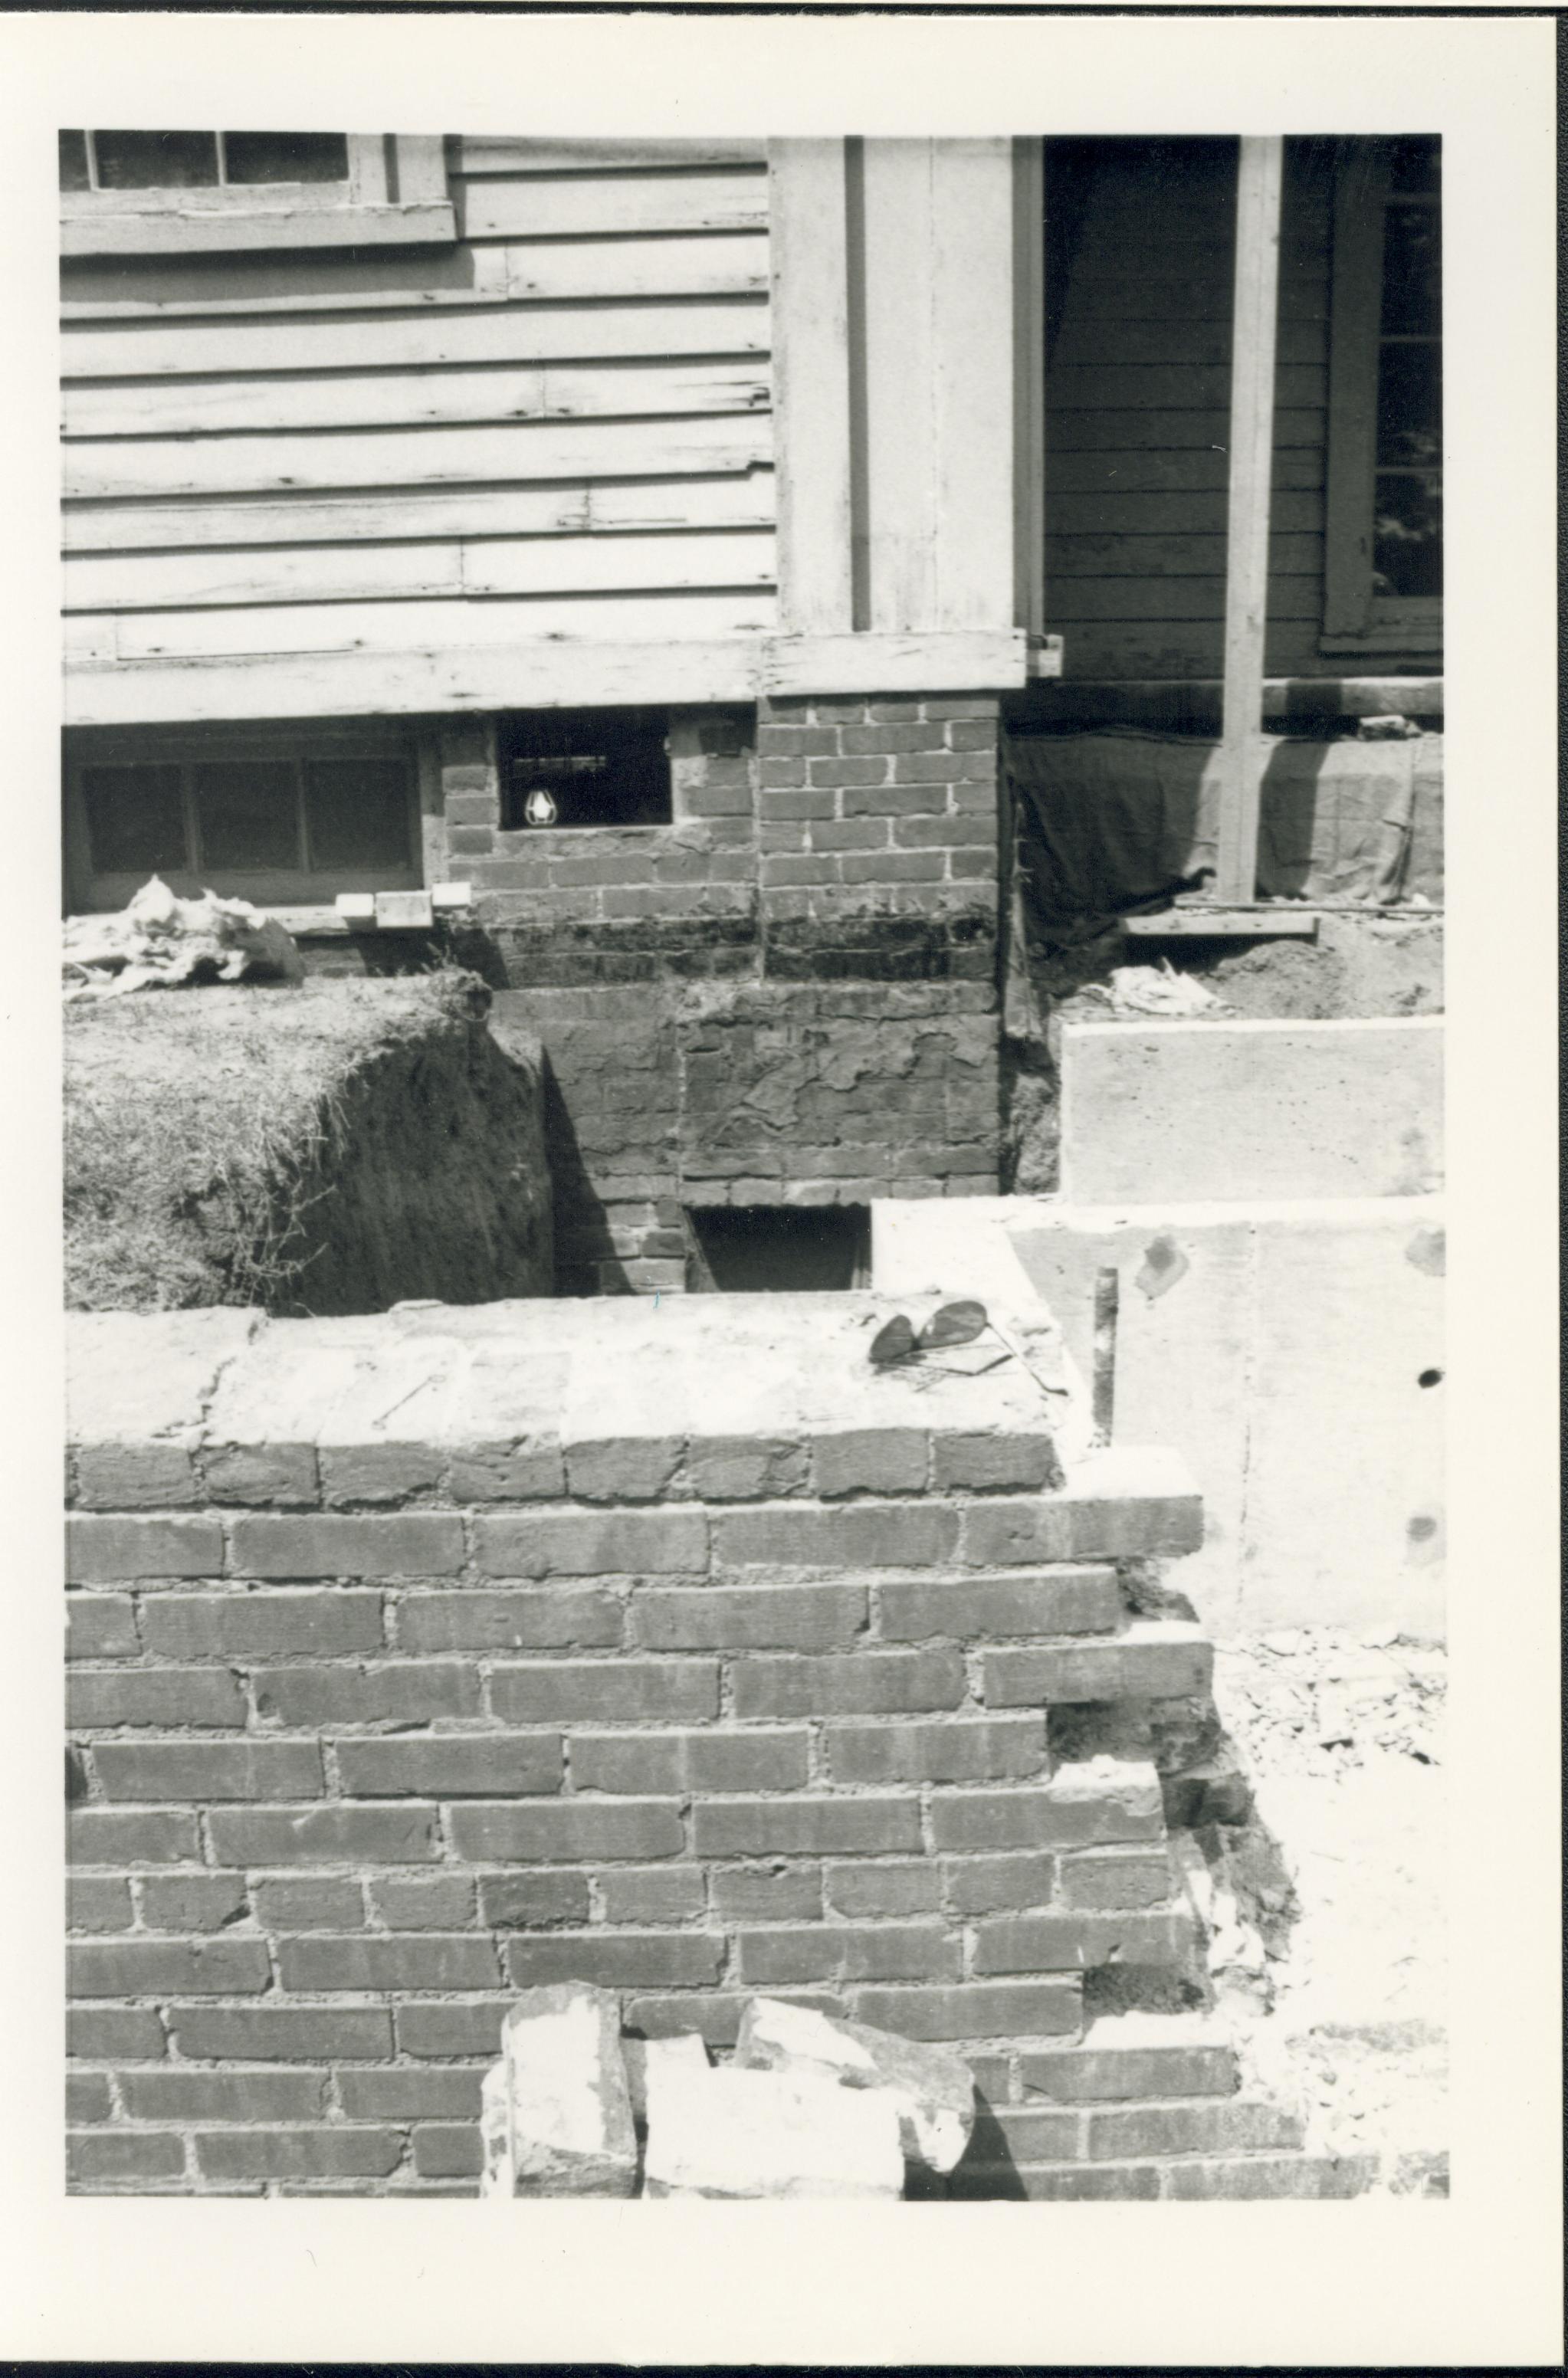 Lincoln Home foundation, south porch, and retaining wall during 1985 archaeology dig. Photographer facing north.